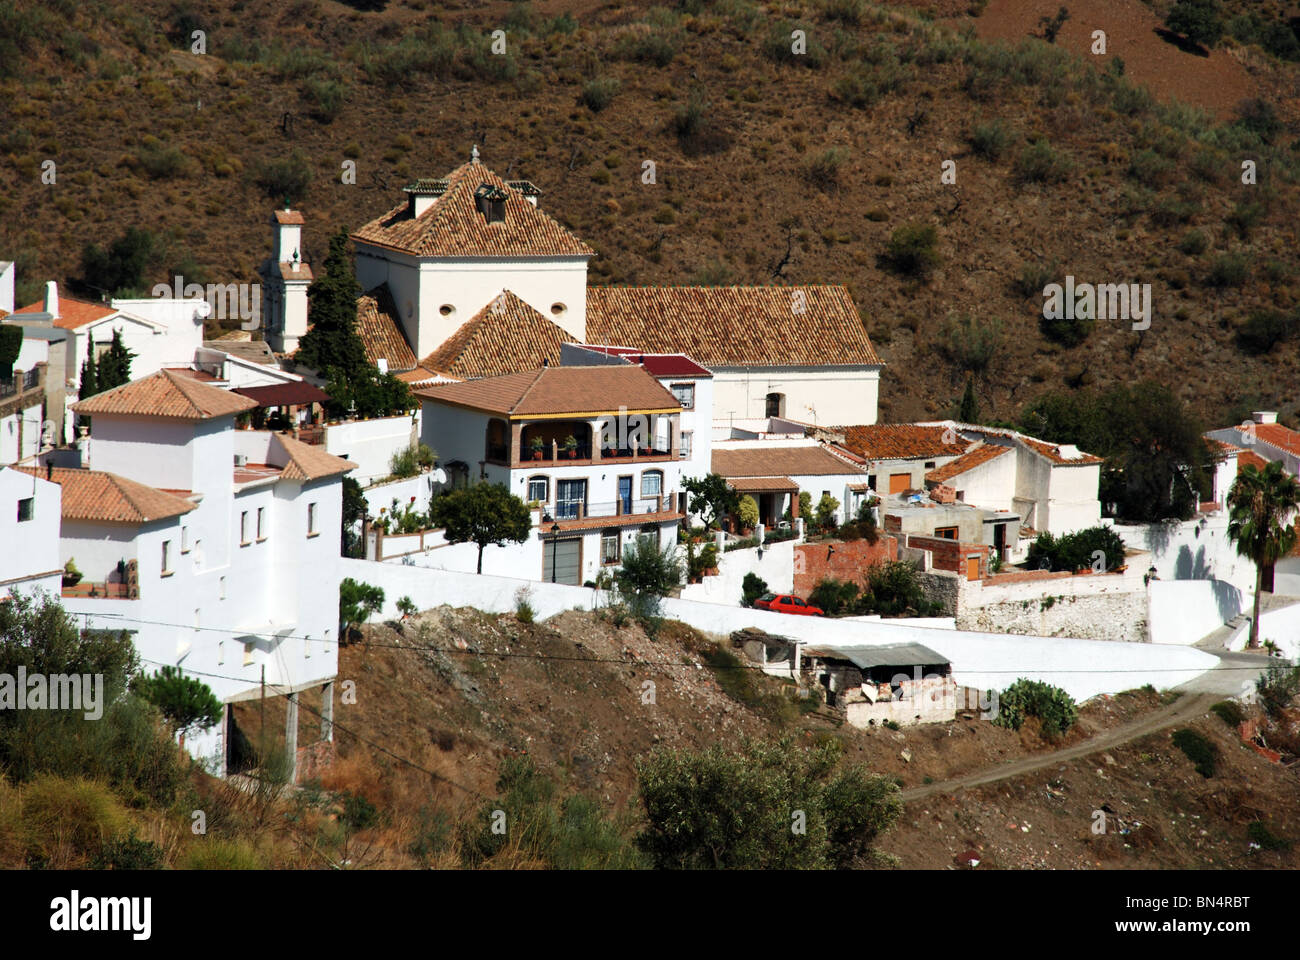 View of whitewashed village (pueblo blanco), Macharaviaya, Costa del Sol, Malaga Province, Andalucia, Spain, Western Europe. Stock Photo